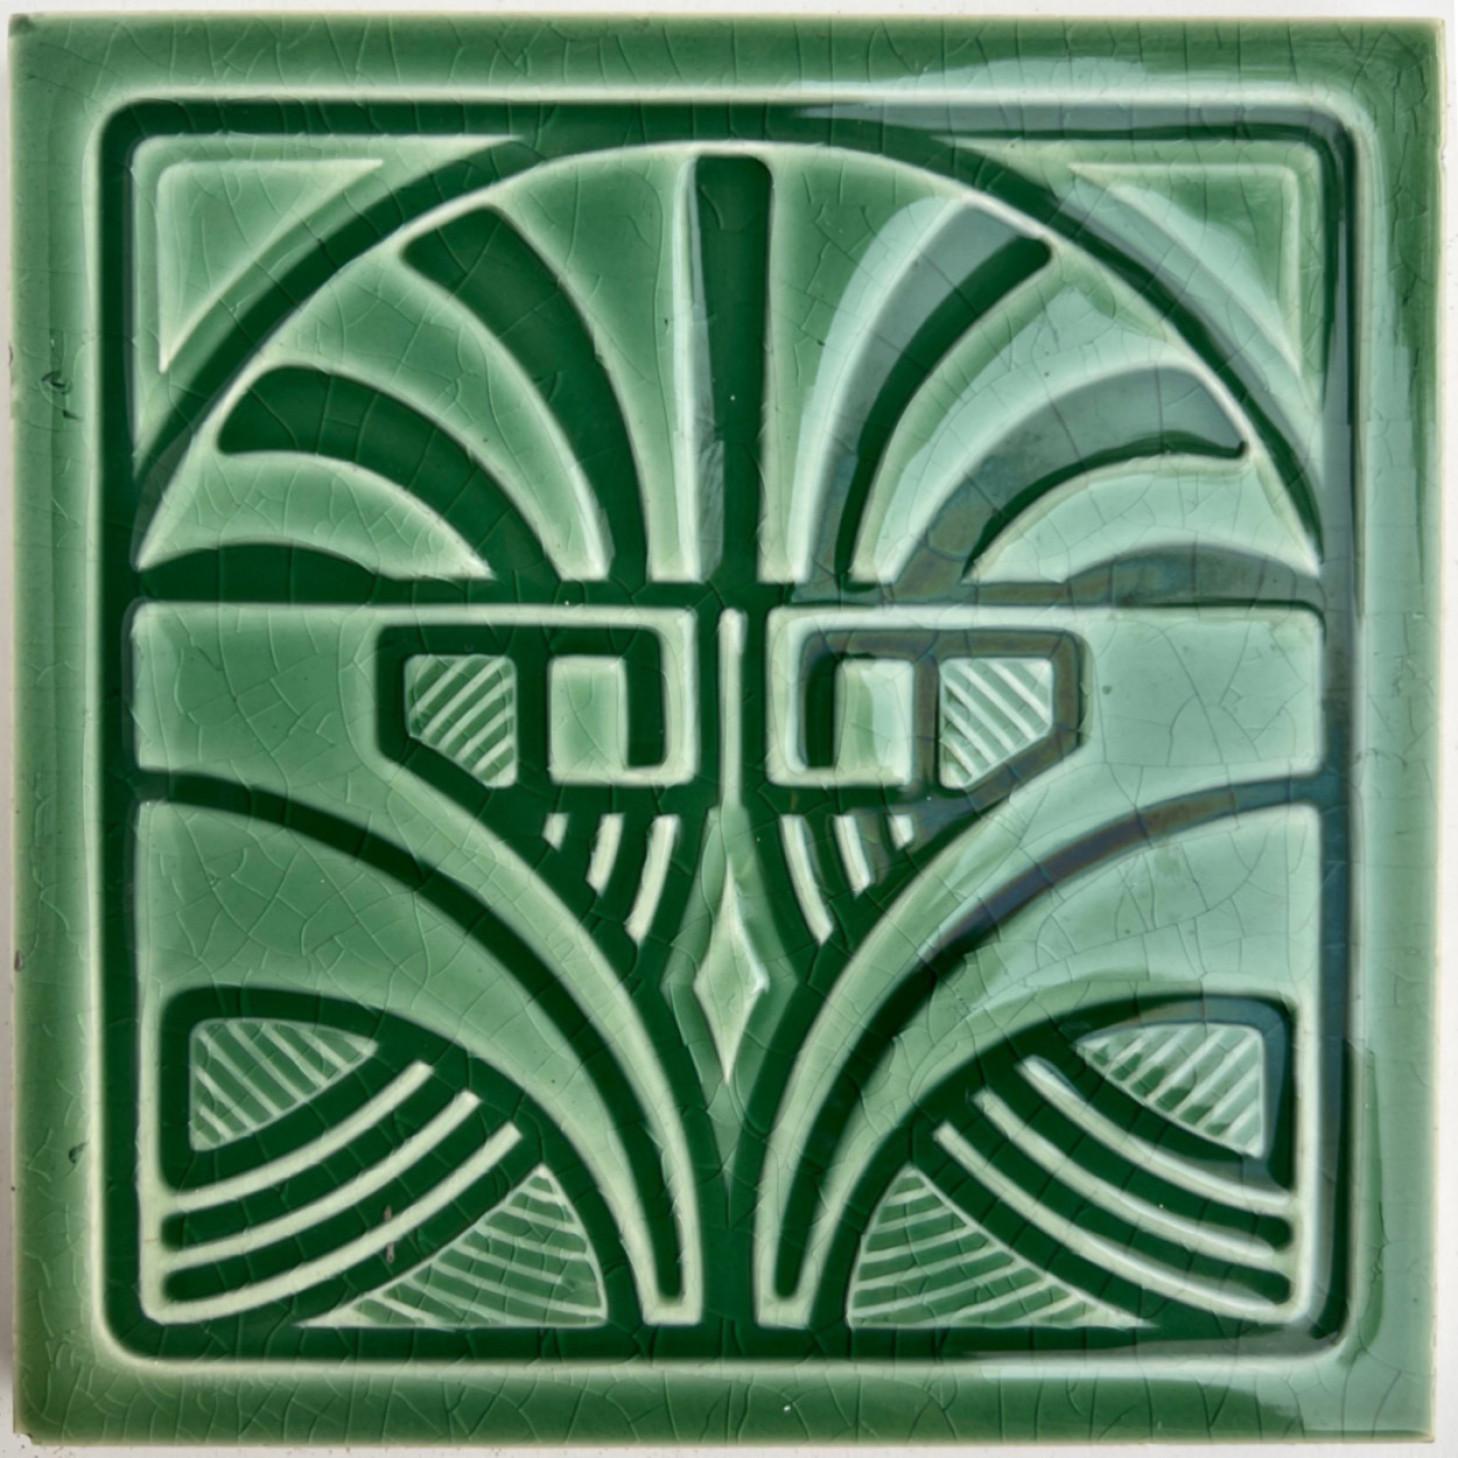 Handmade tiles in a beautiful green glazed color. Manufactured around 1920 by Nord Deutsche Steingutfabrik, Germany.
These tiles would be charming displayed on easels, framed or incorporated into a custom tile design.

We also have dark green border